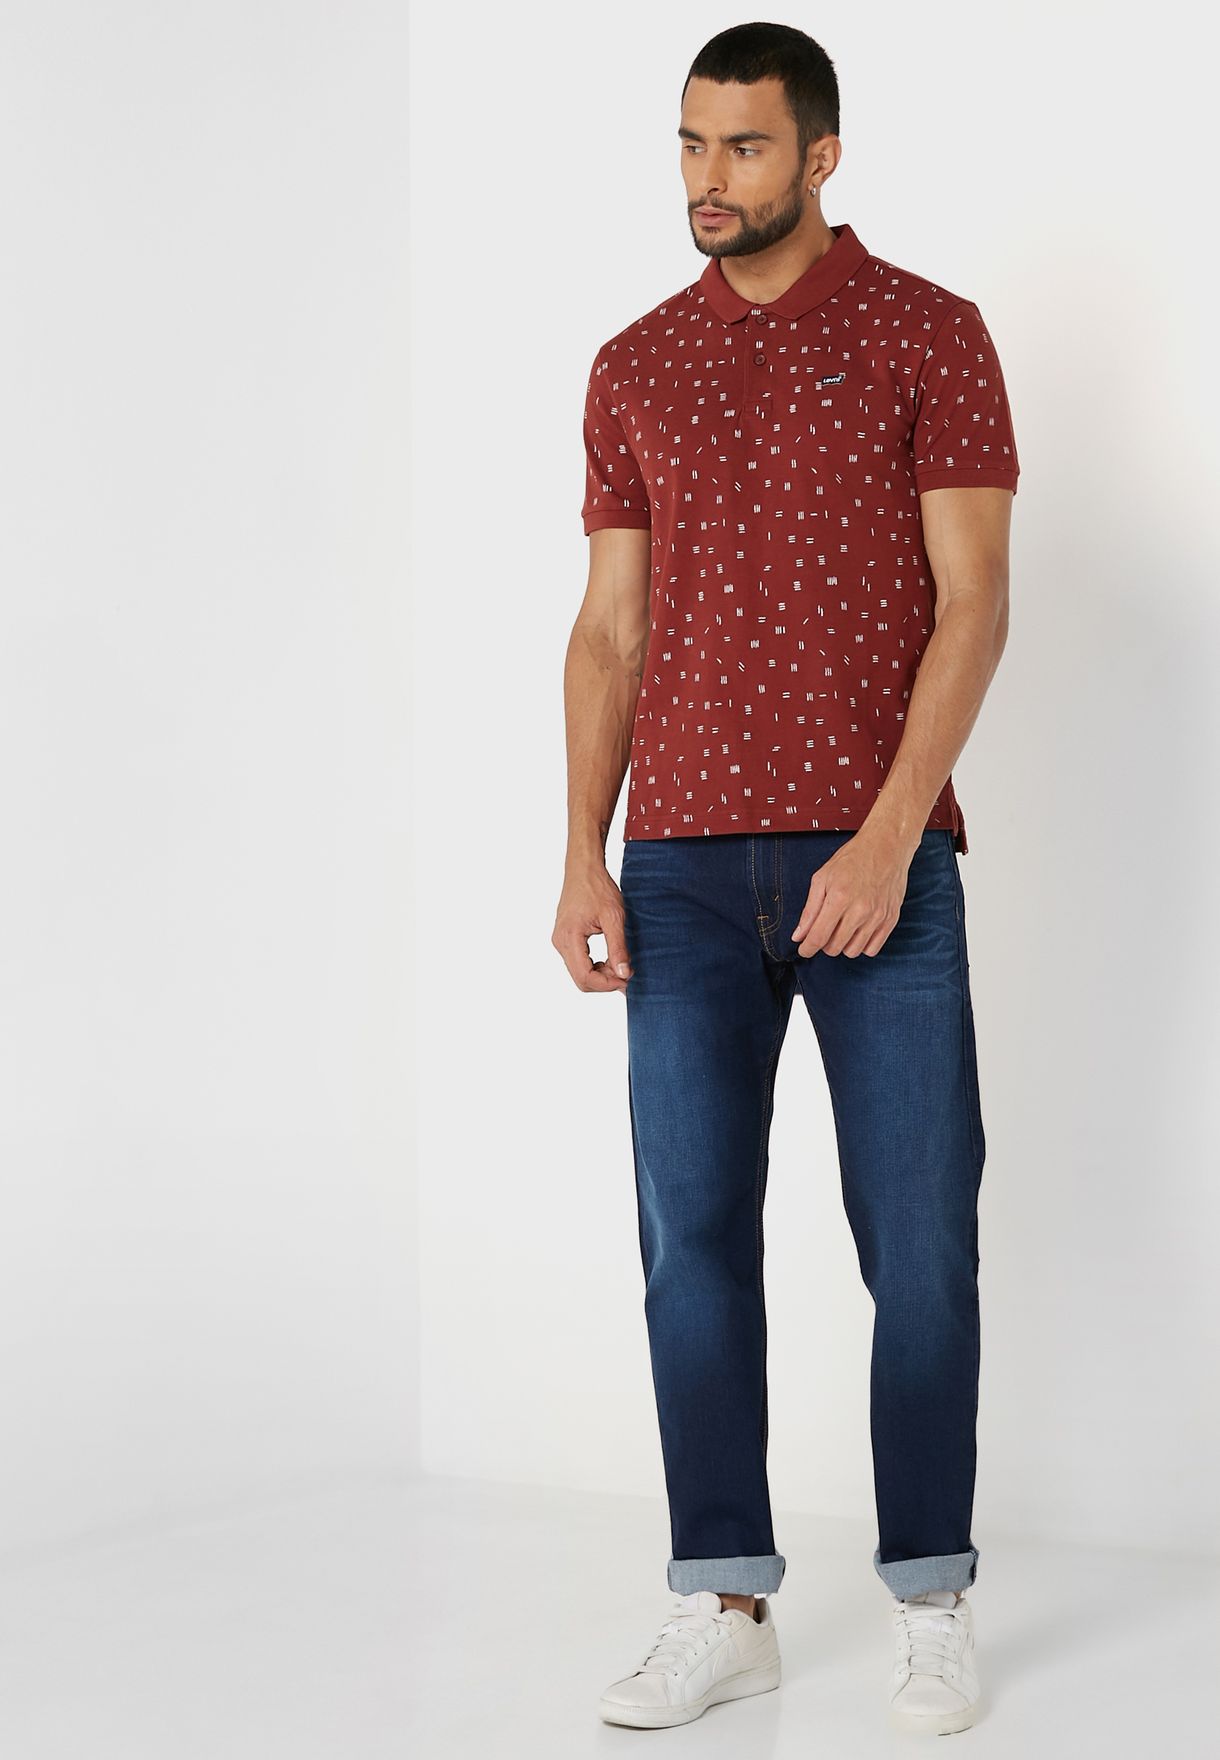 Buy Levis red Printed Polo Shirt for Men in MENA, Worldwide